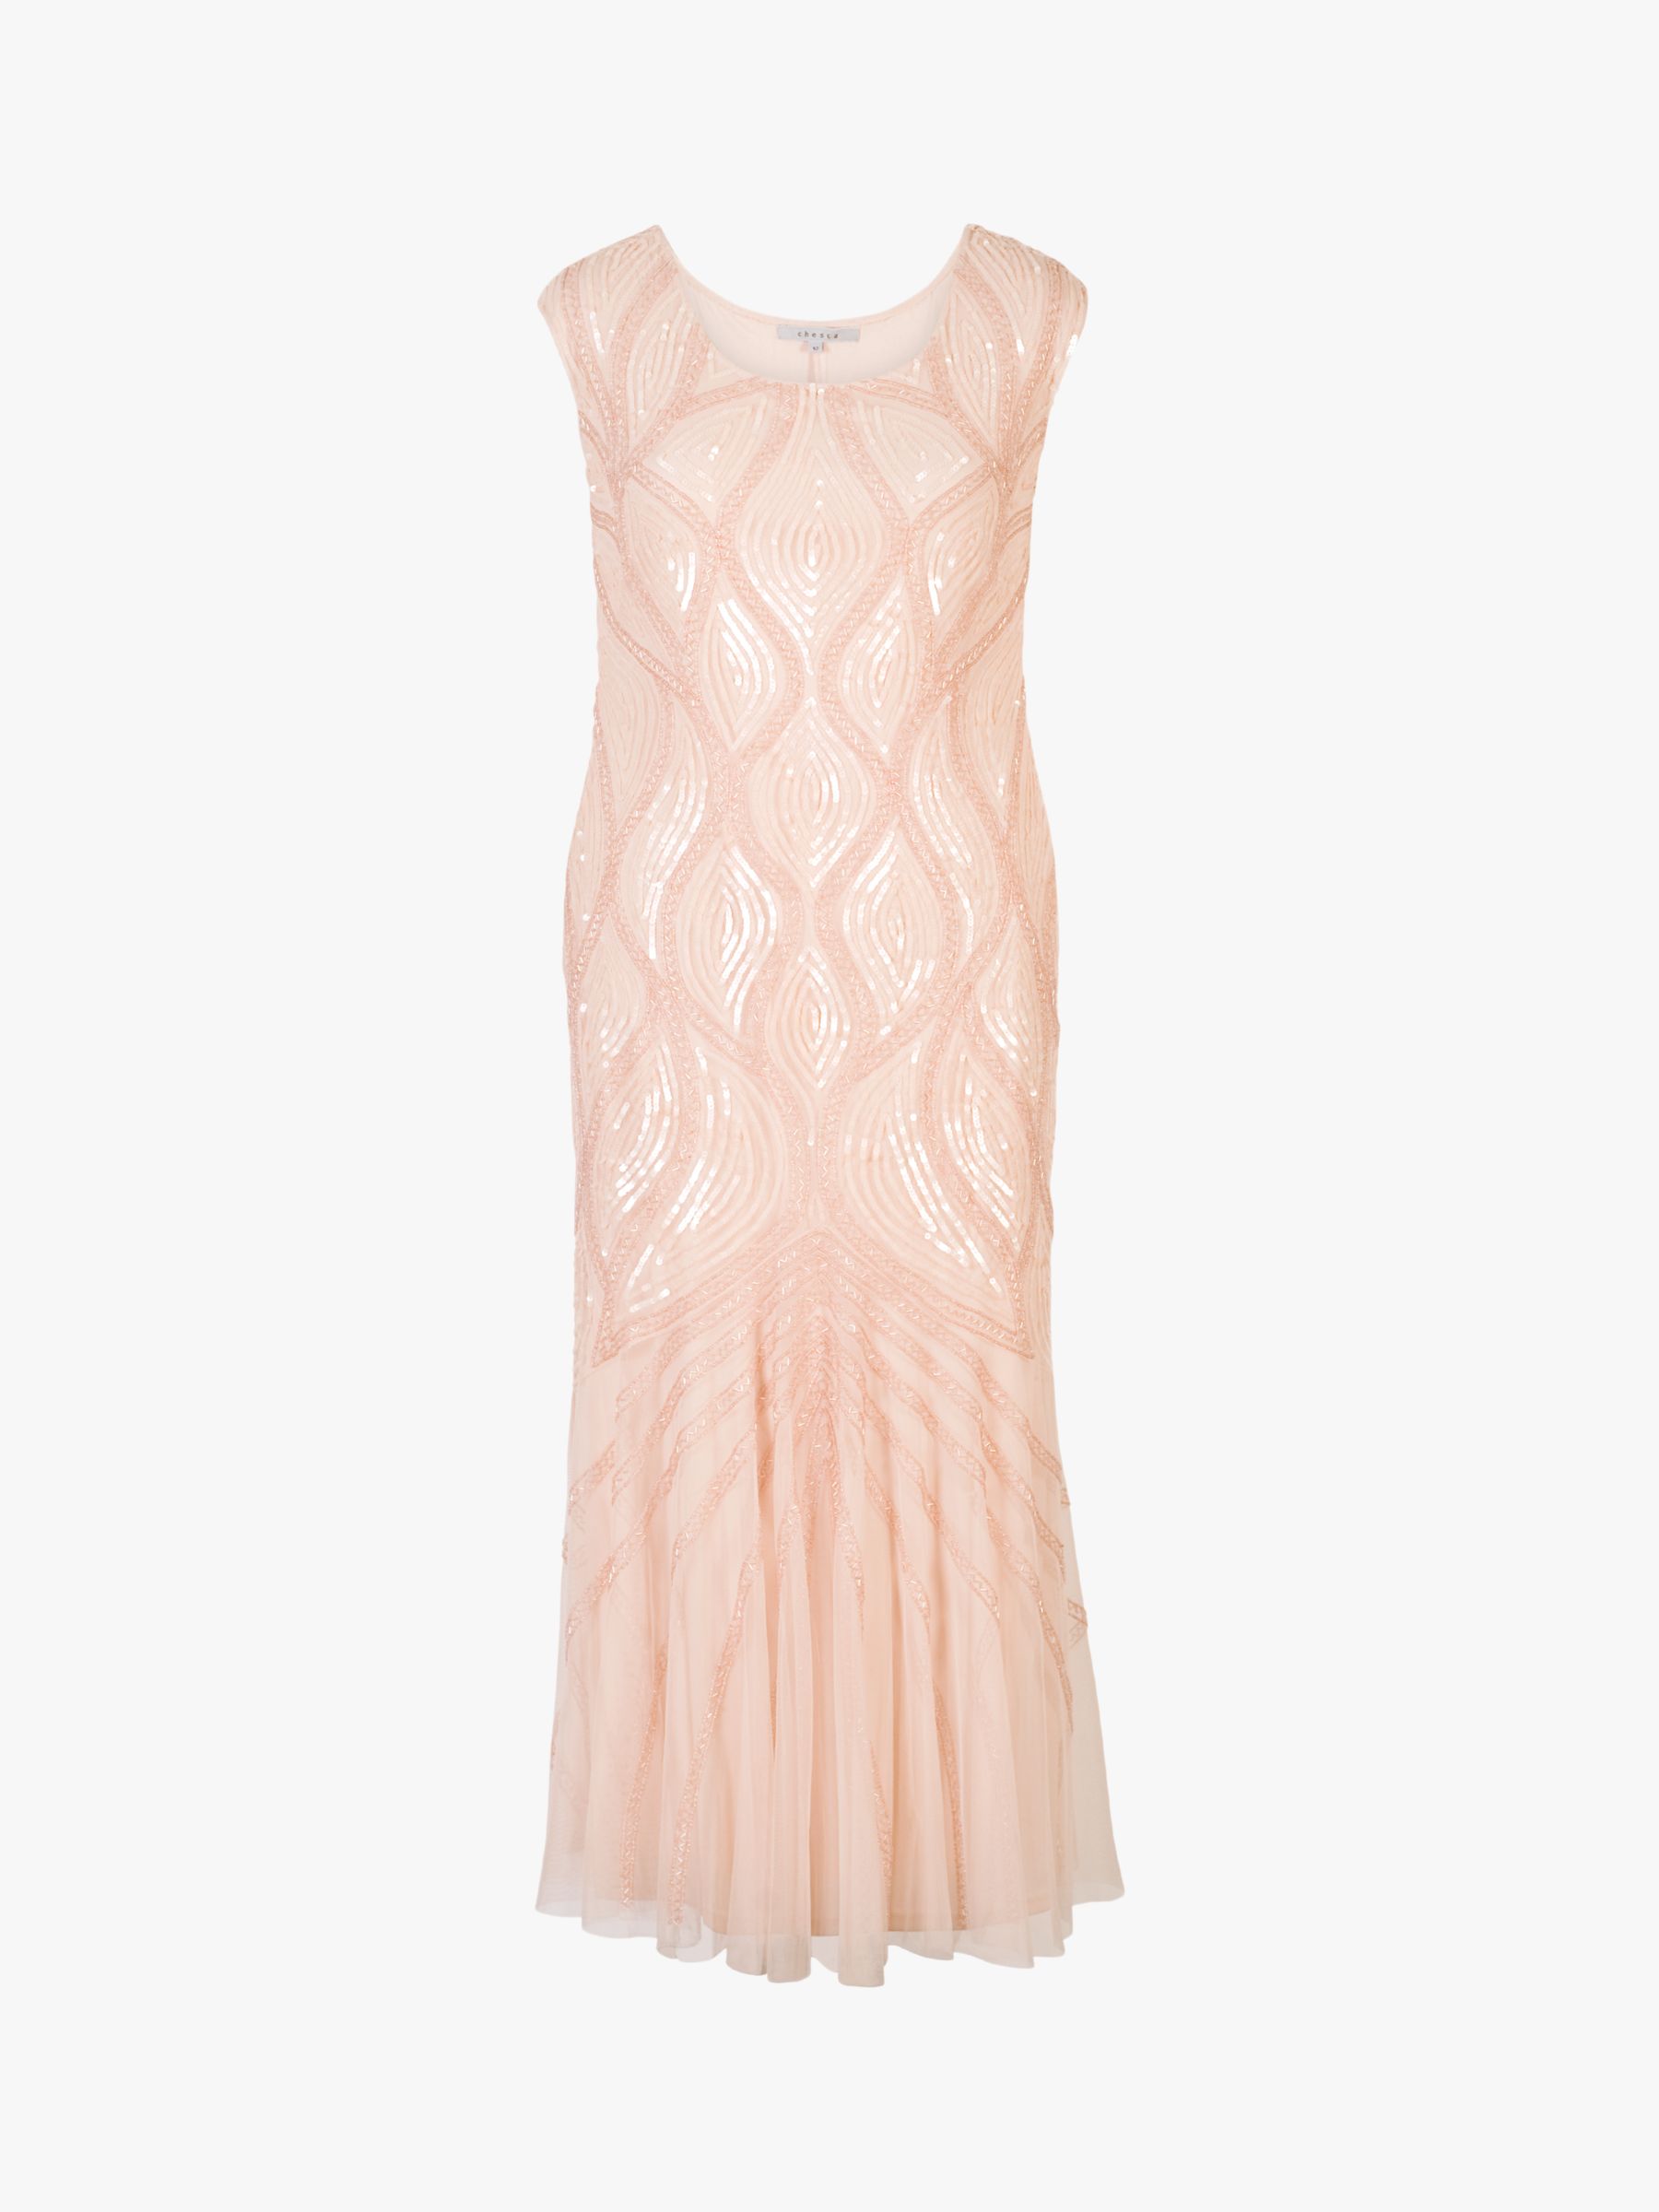 Chesca Beaded Mesh Dress, Pink at John Lewis & Partners